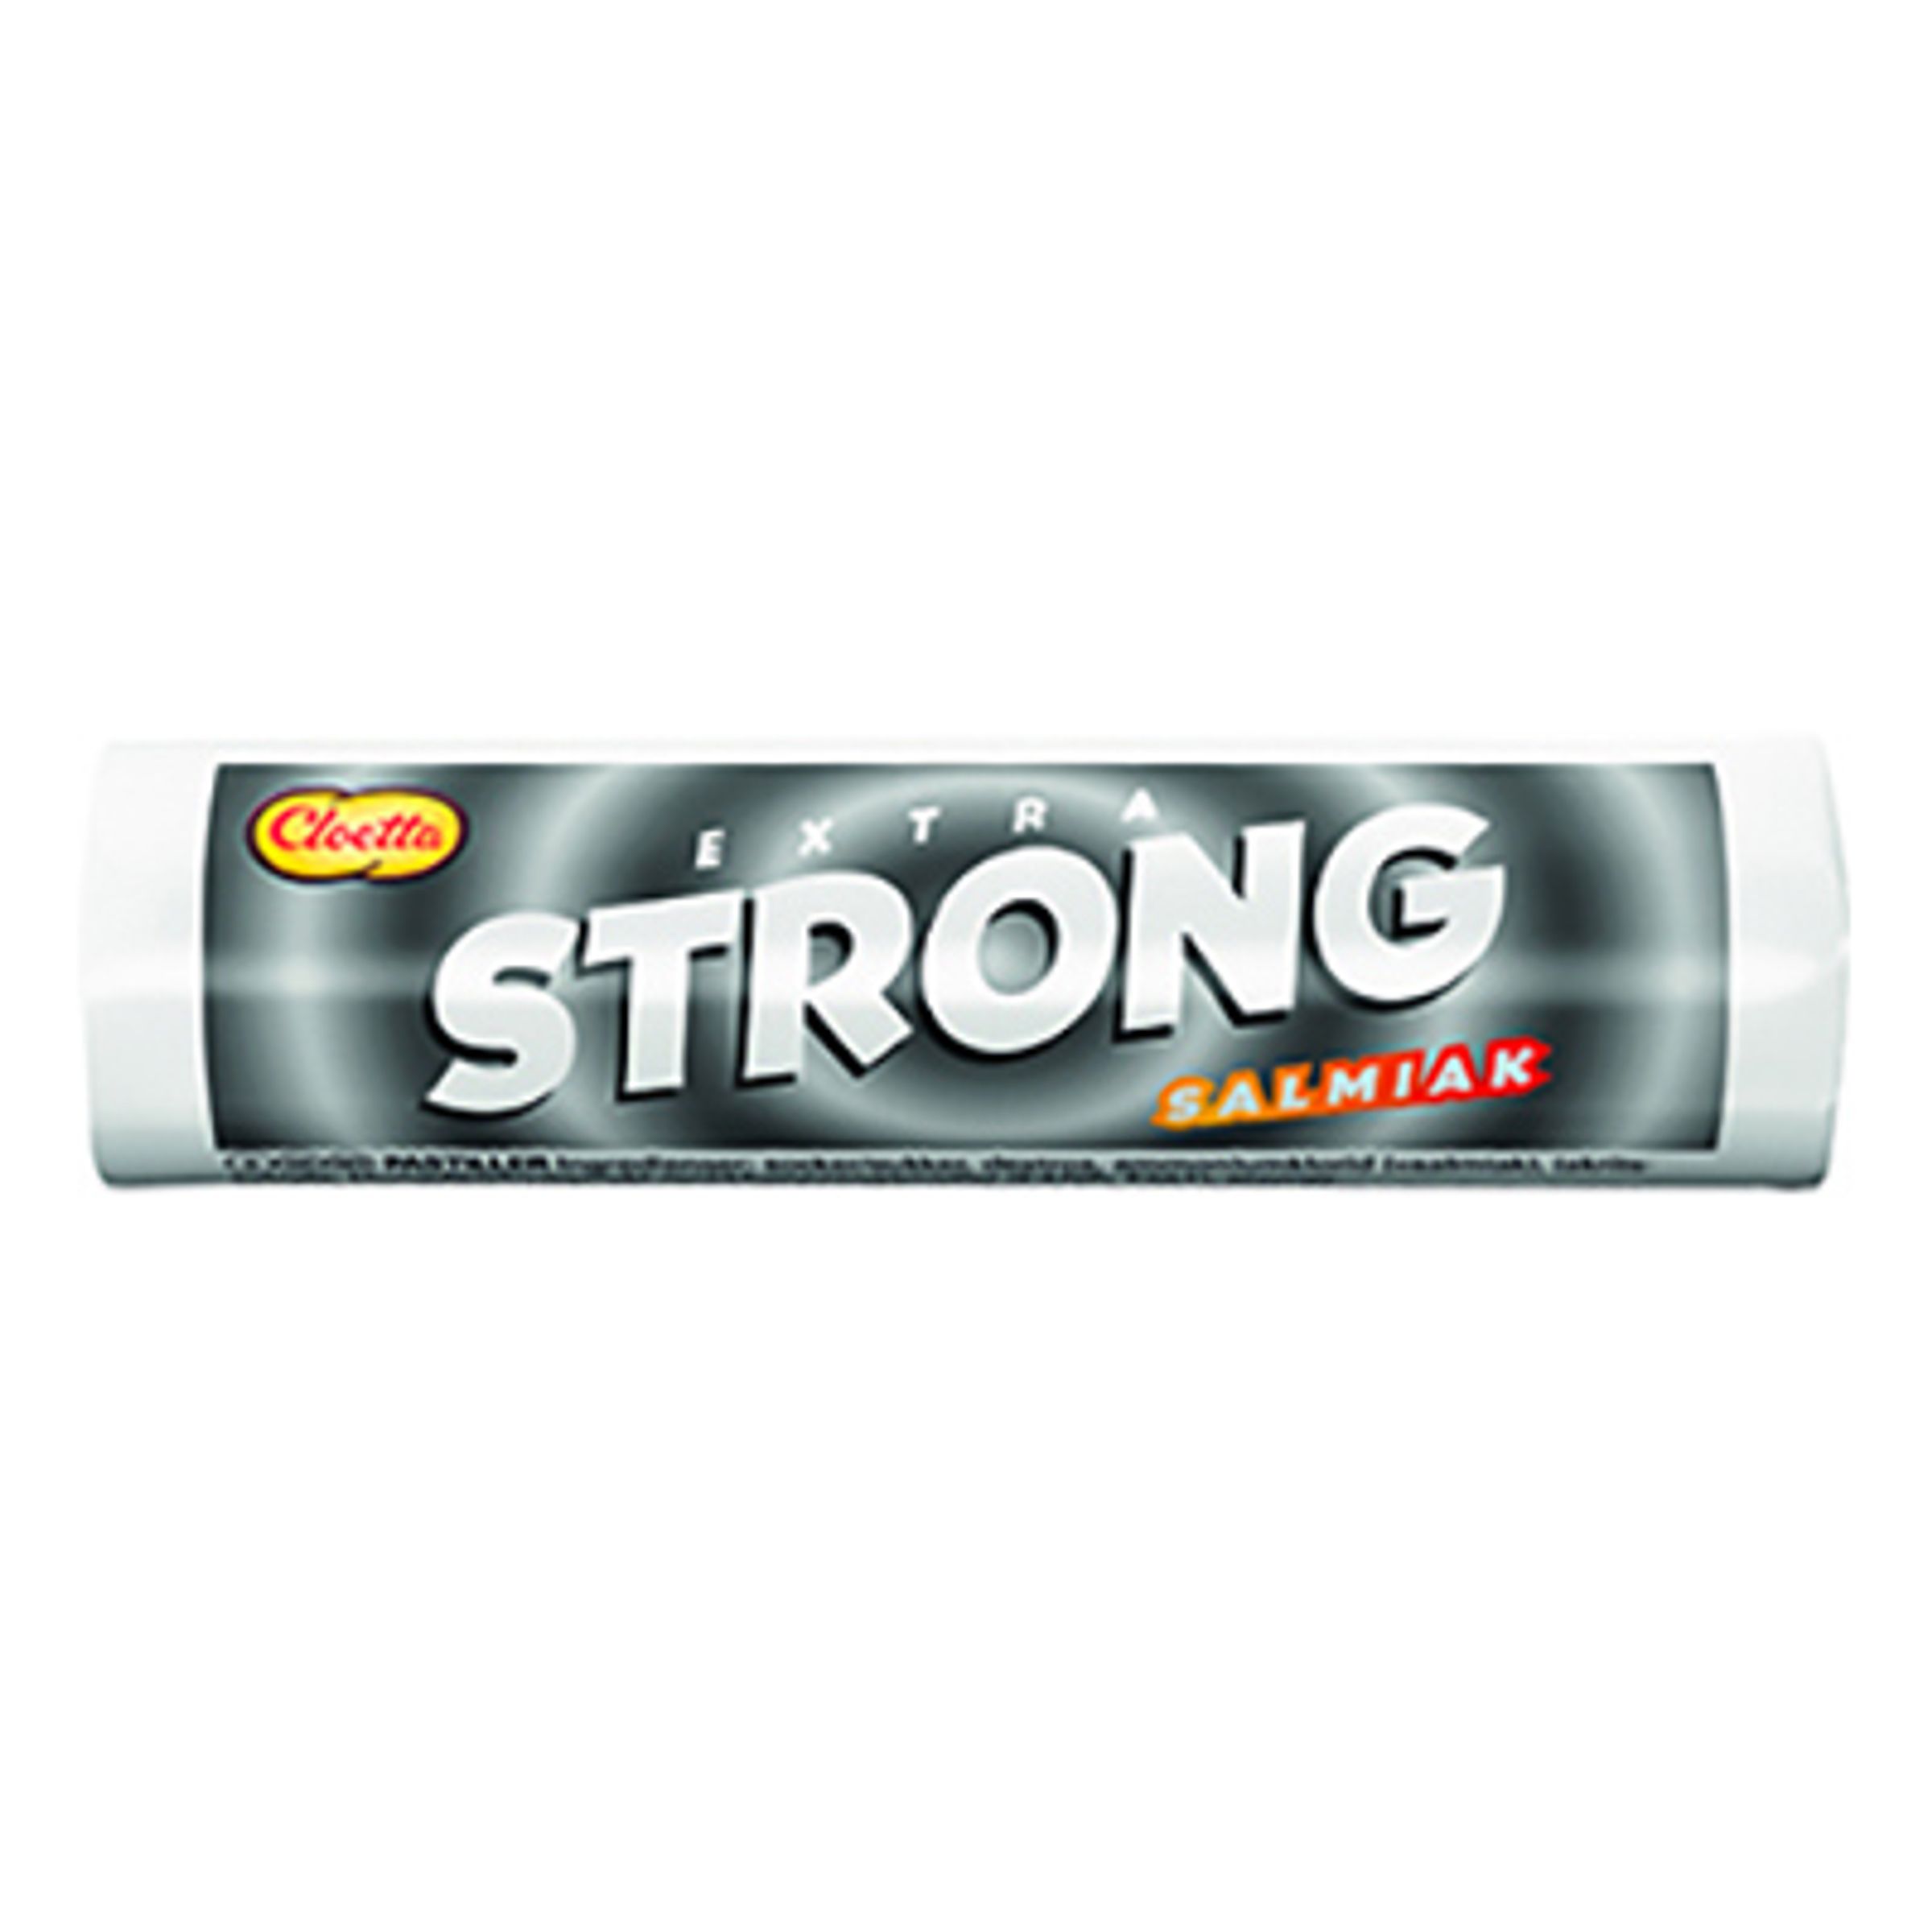 Extra Strong Salmiak Storpack - 40-pack